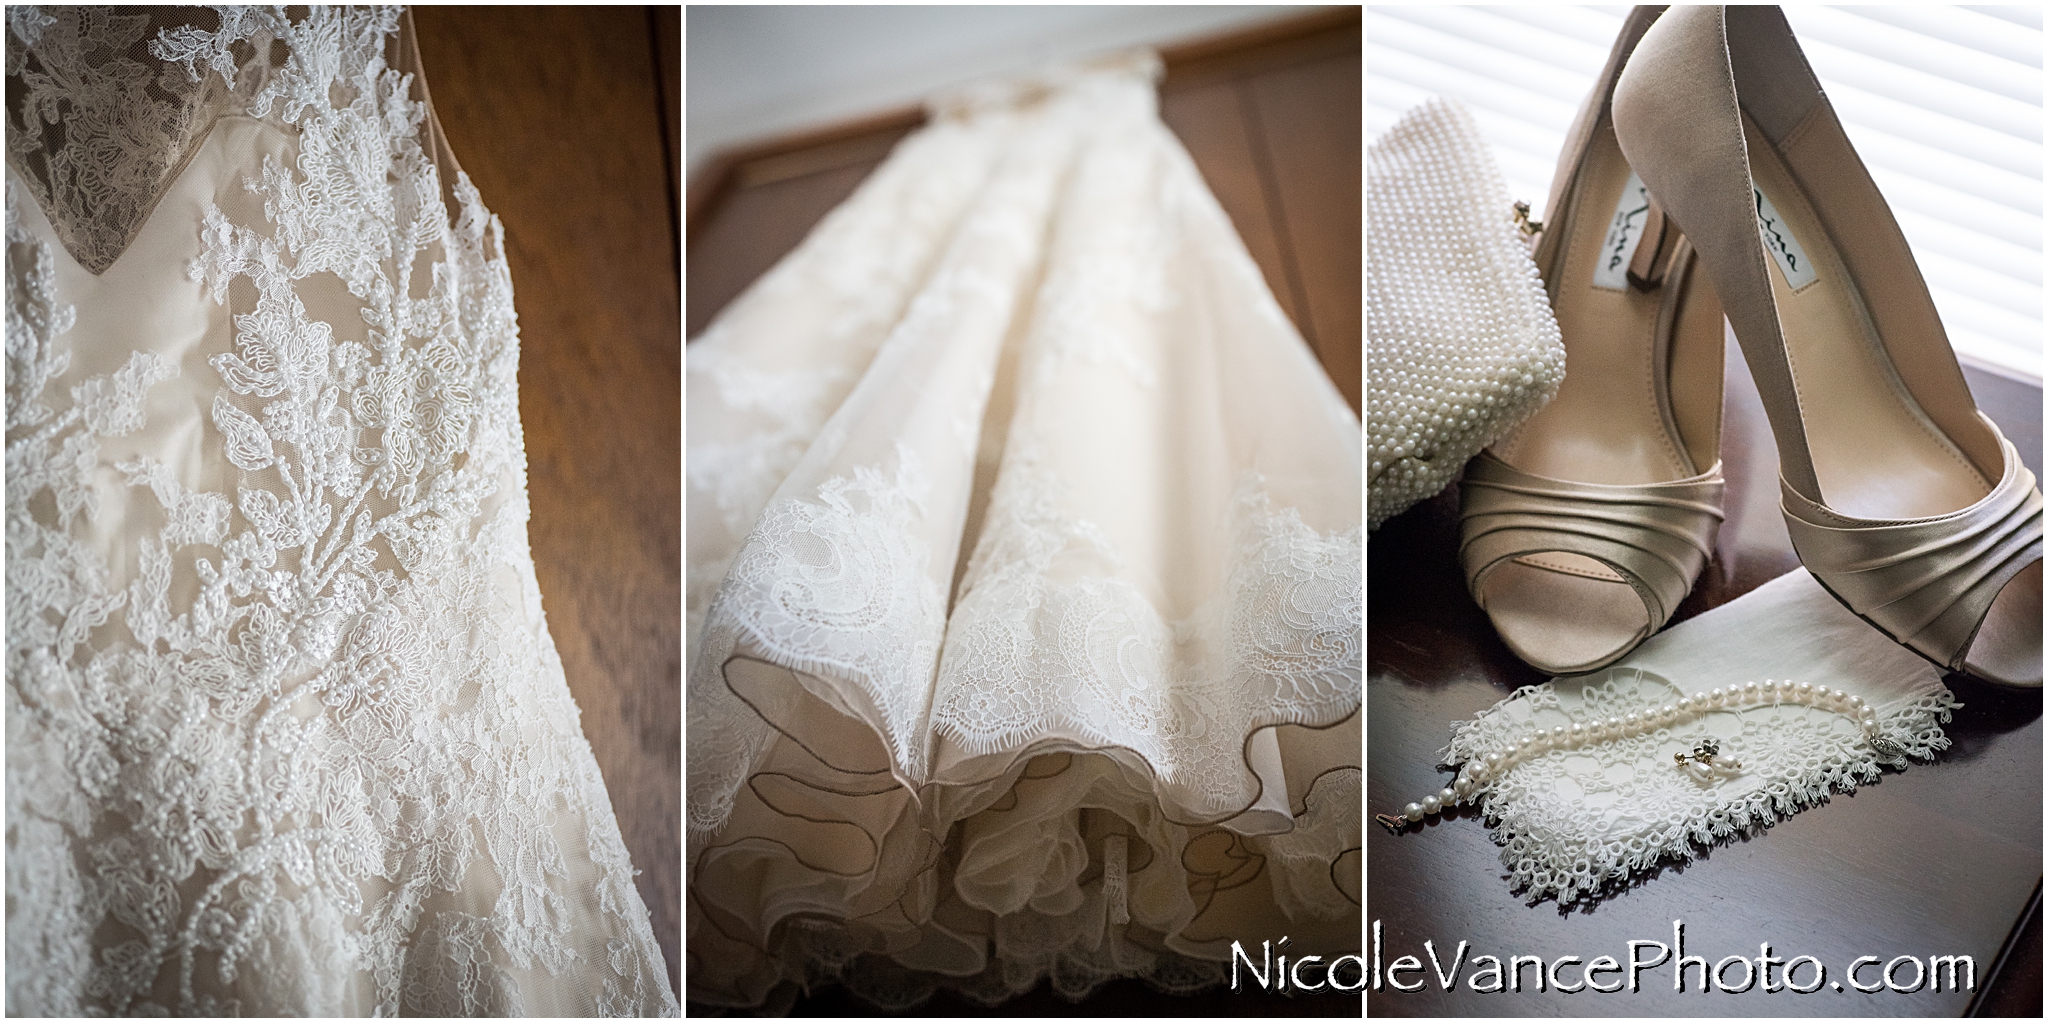 Wedding dress details and shoe details with pearls.